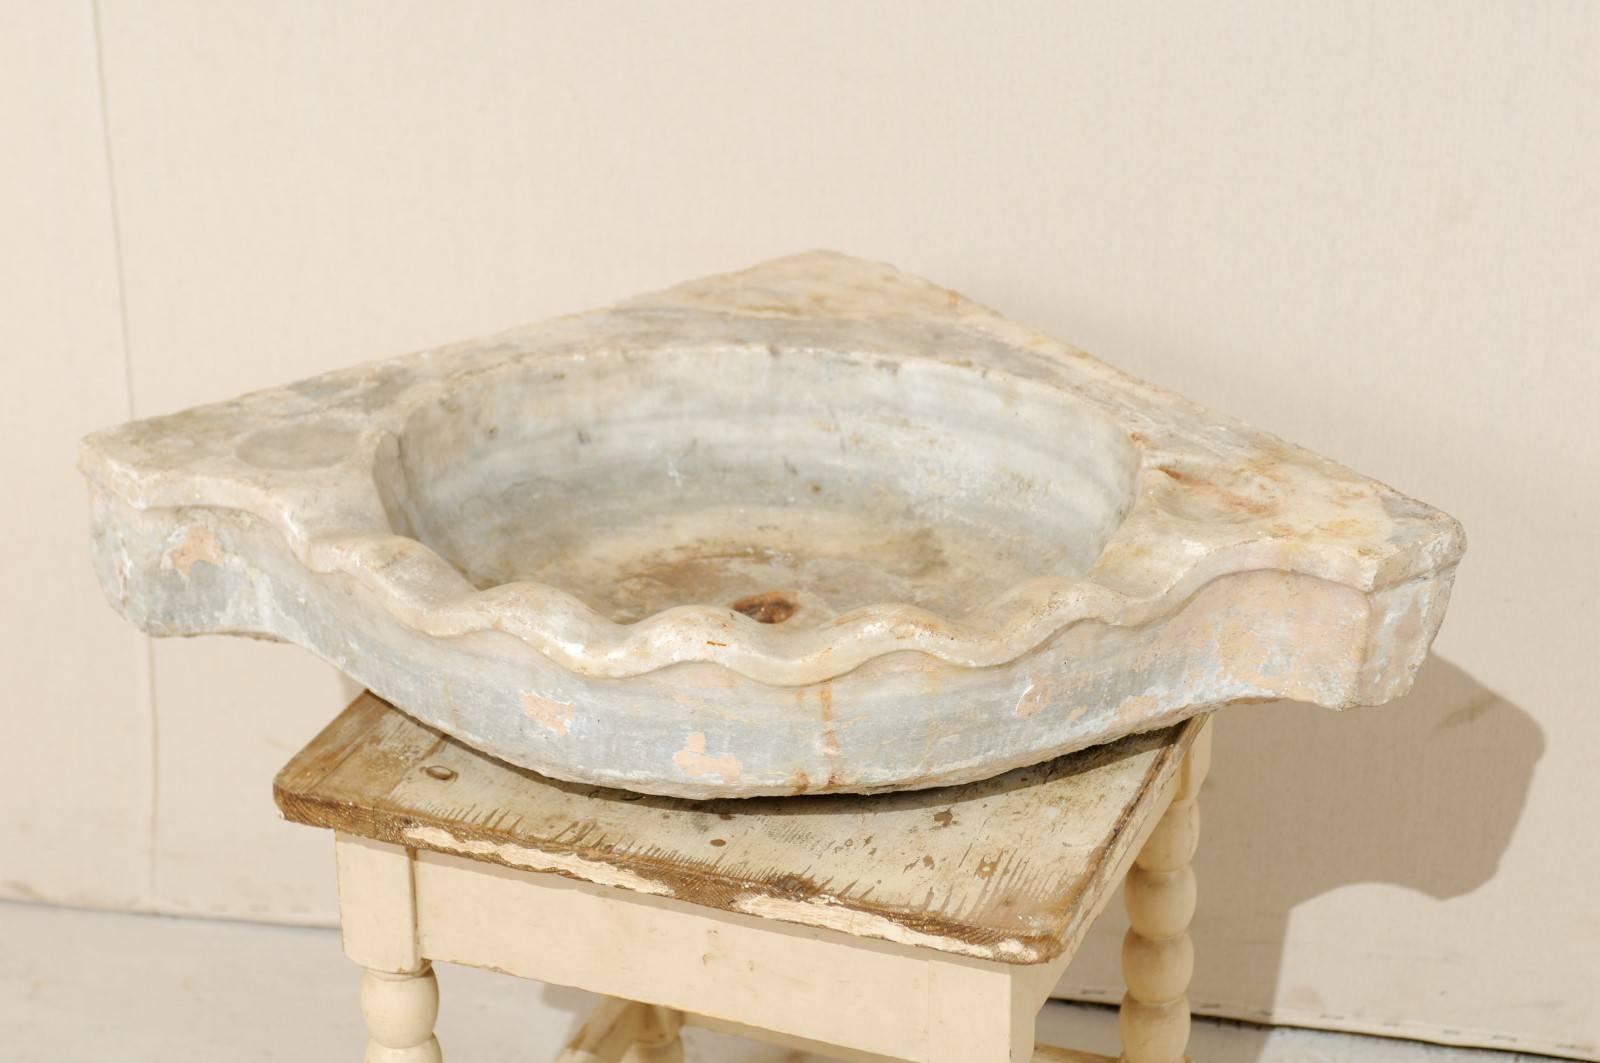 This is a European 19th century marble corner sink. This 19th century marble sink is designed to fit into a corner with a curved front. The coloring is primarily neutral tones of porcelain and alabaster. It is carved beautifully, with a scalloped